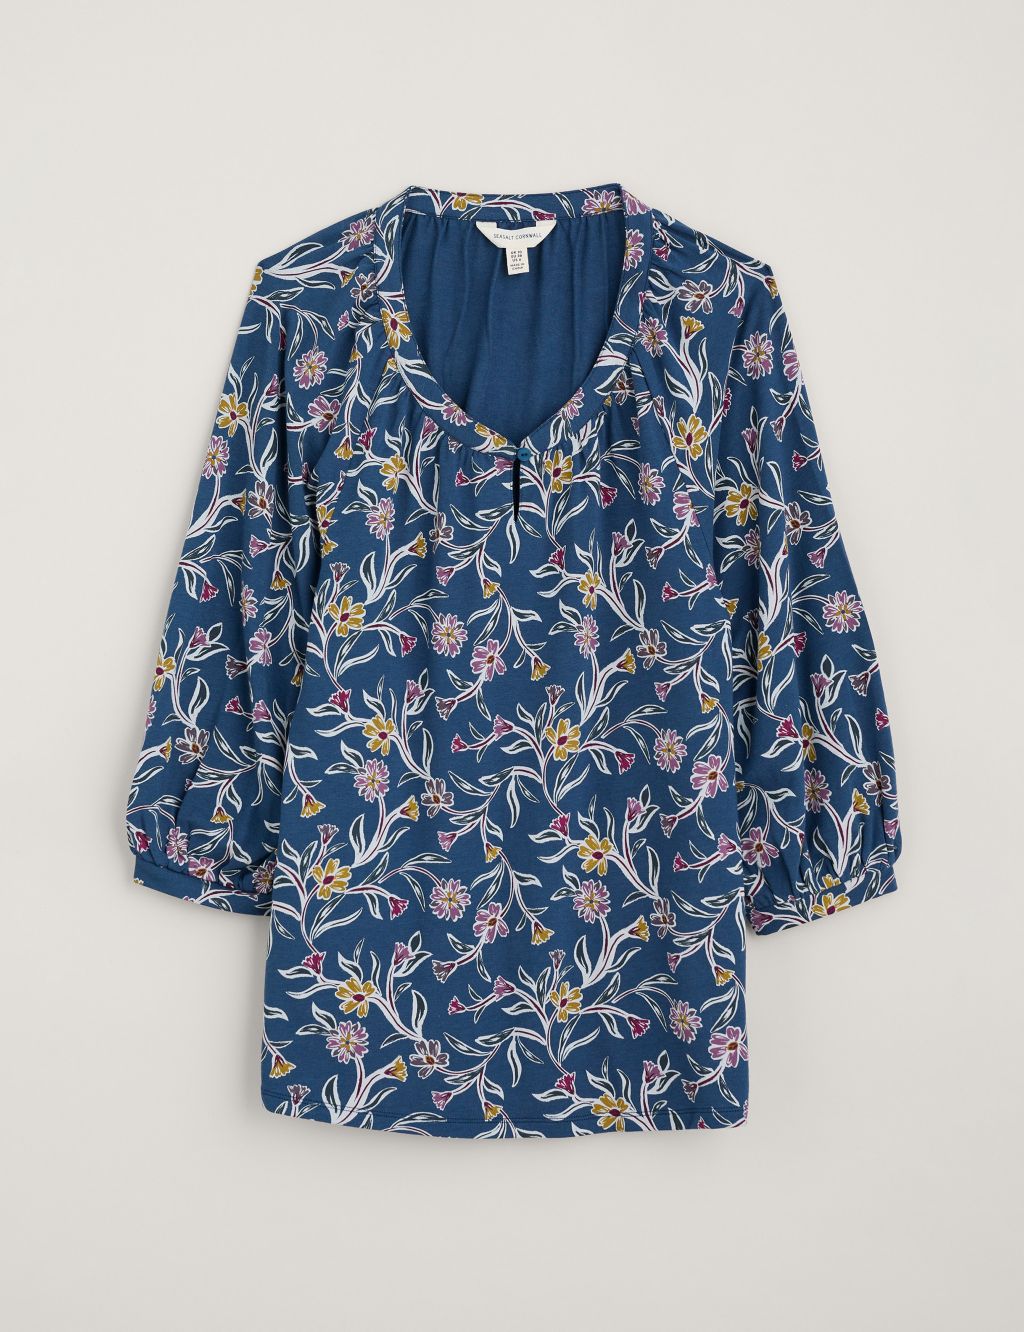 Floral Top With Cotton image 2